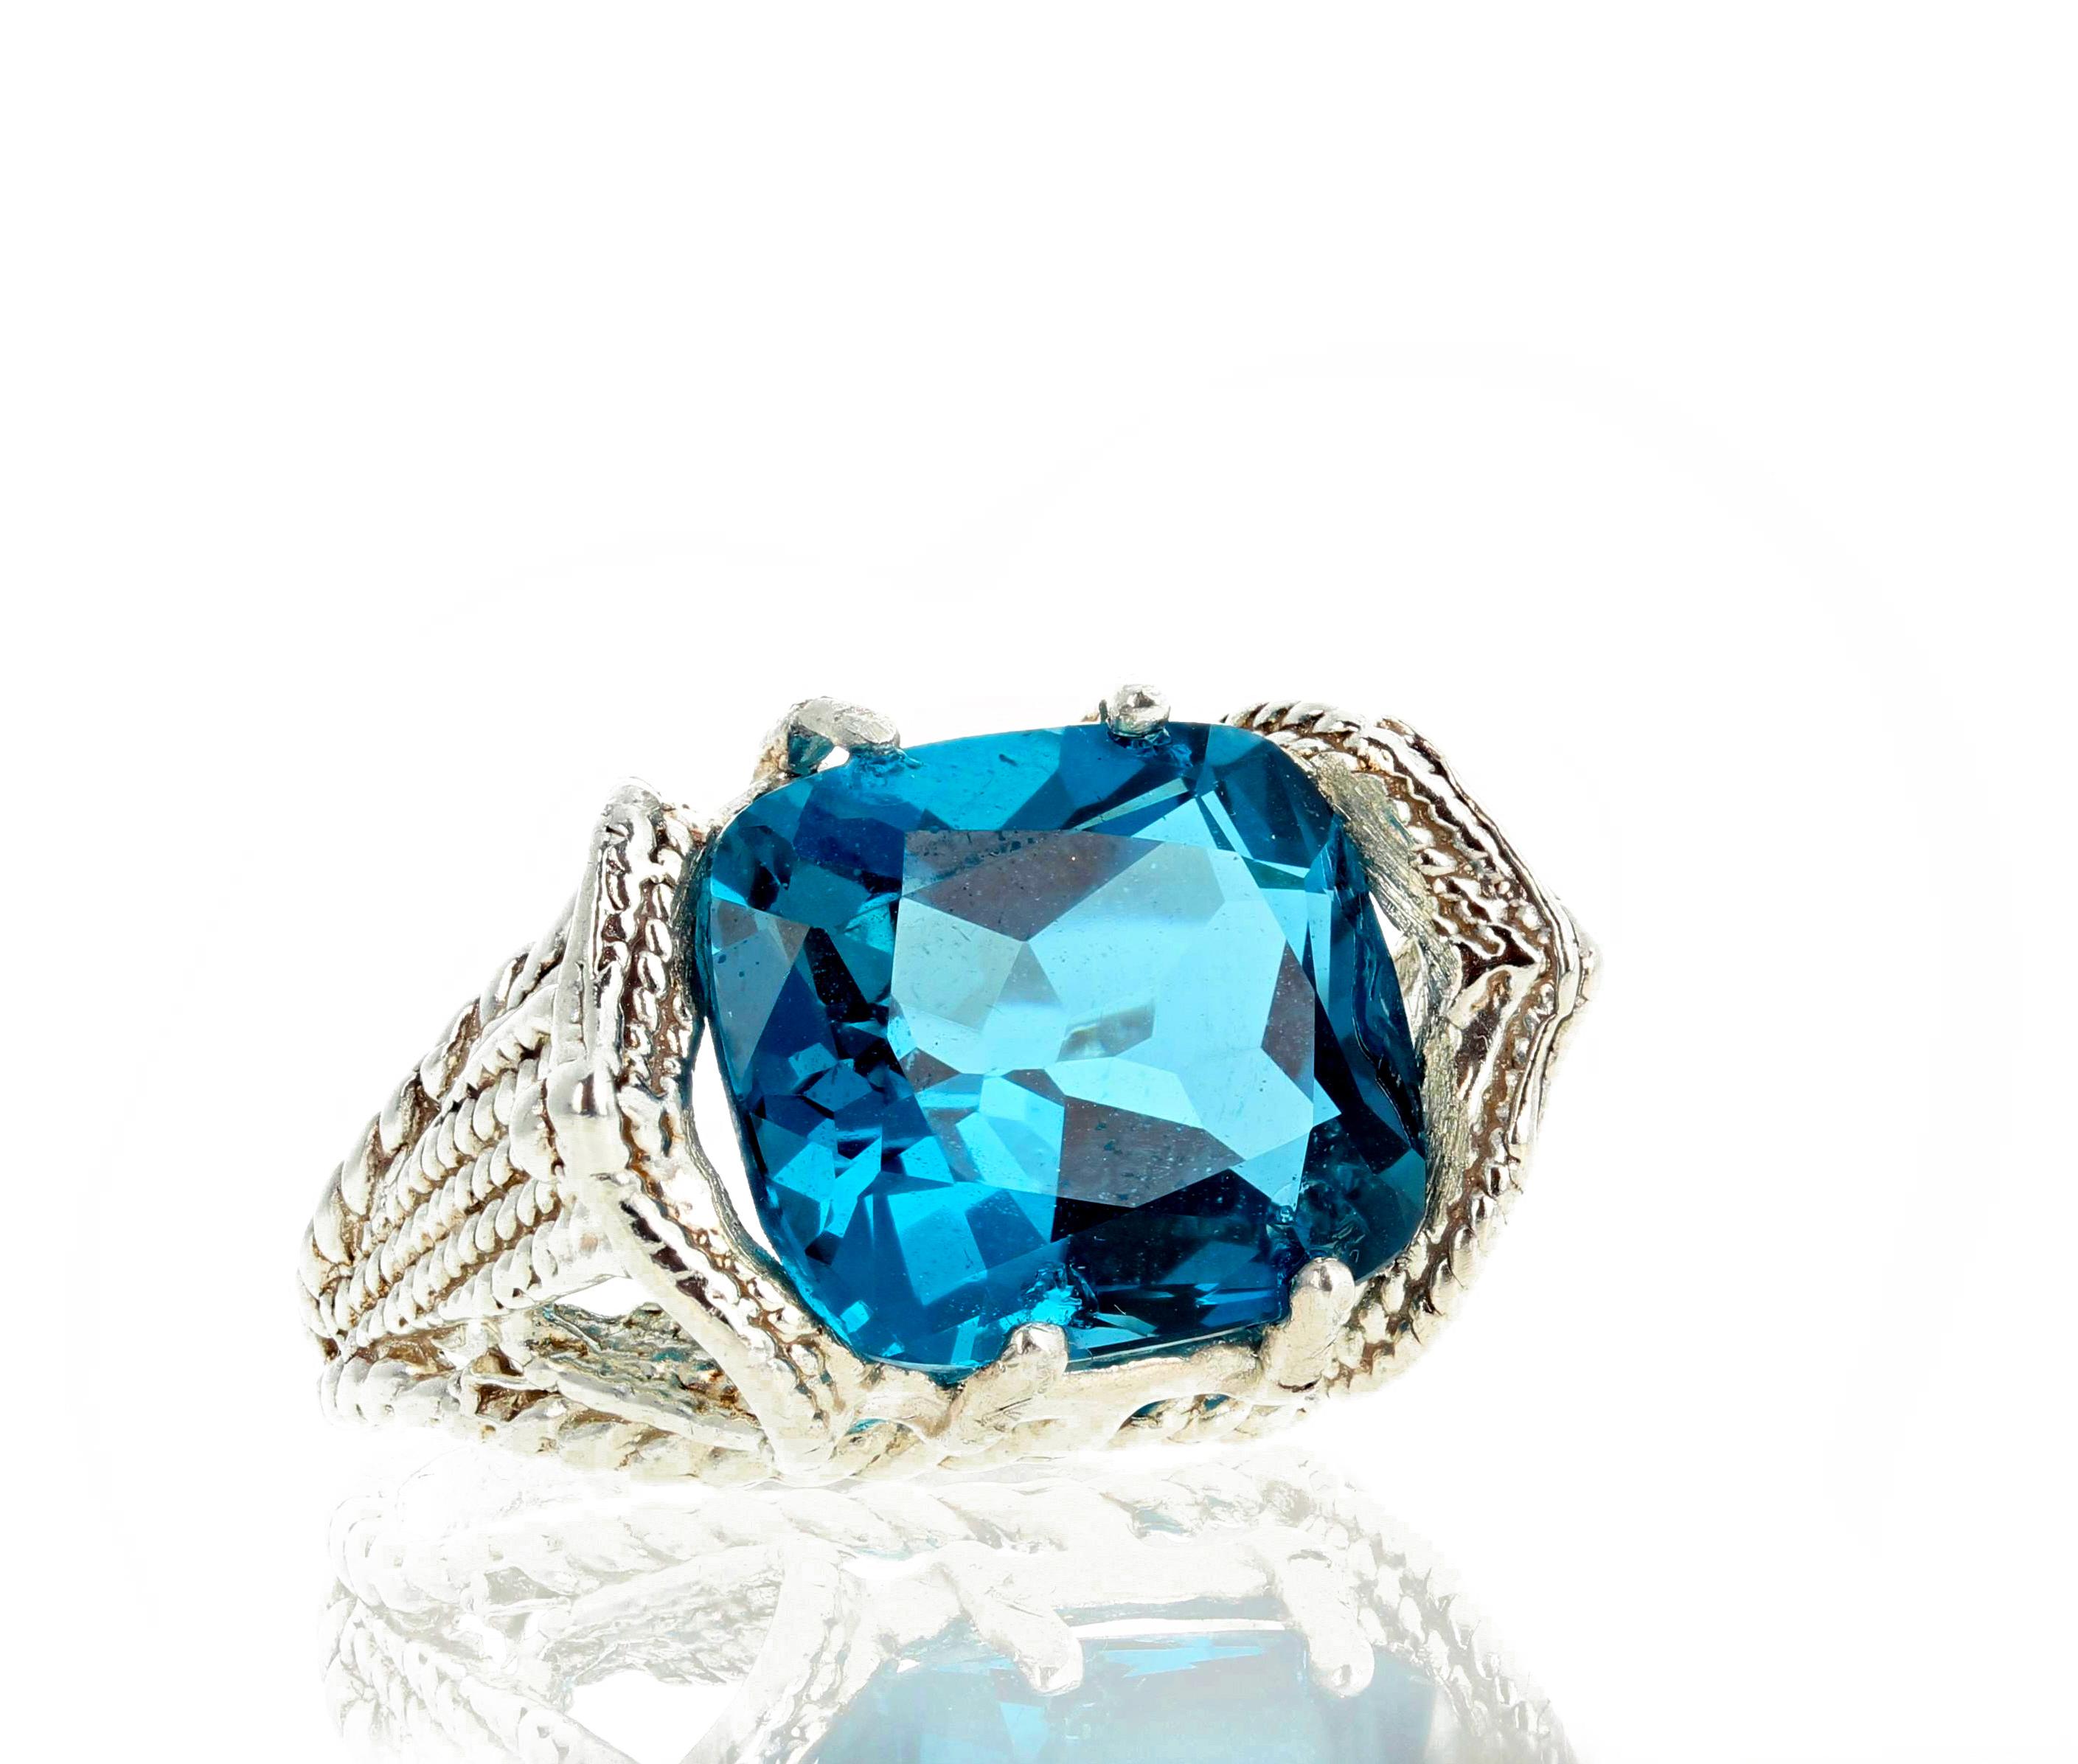 Glittering HUGE bright 10.95 Carat London Blue Topaz set in a unique sterling silver ring size 7 (sizable for free).  The Topaz measures 14 mm x 12 mm and is perfect for your next dinner party.  